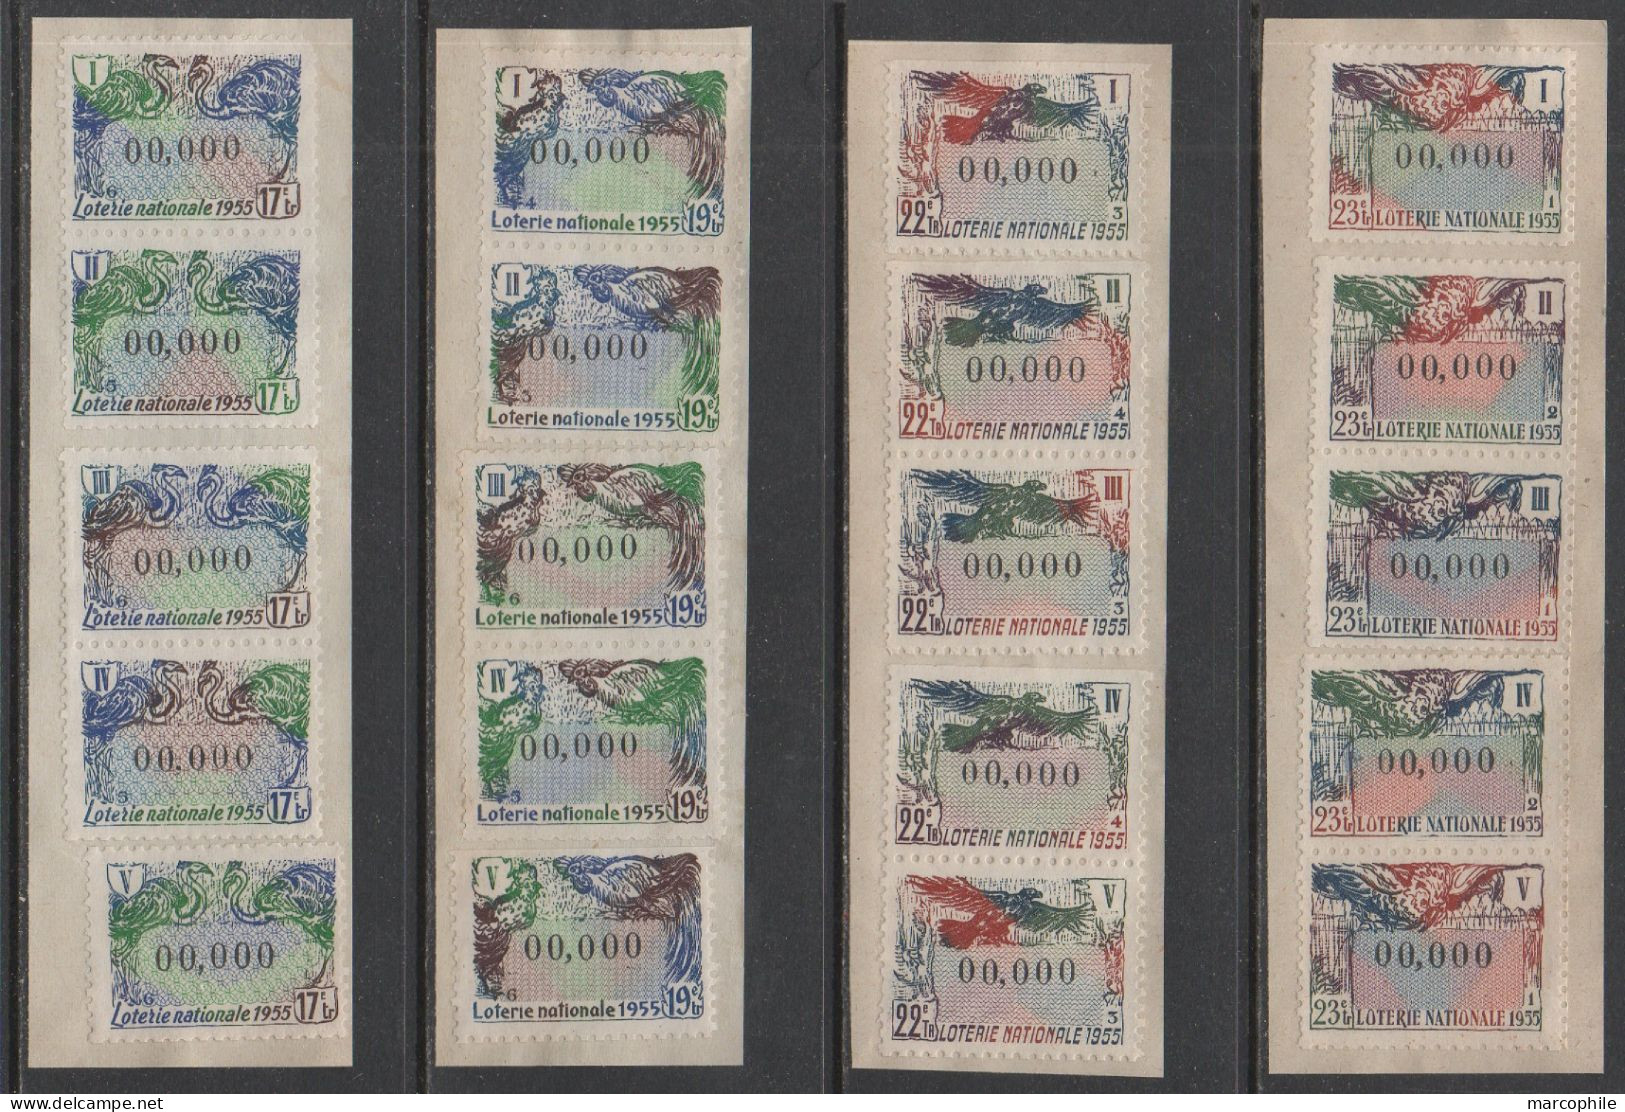 FRANCE - LOTERIE NATIONALE / 1955 - 20 VIGNETTES SPECIMEN DIFFERENTES NUMEROTEES "000.000" - Lottery Tickets